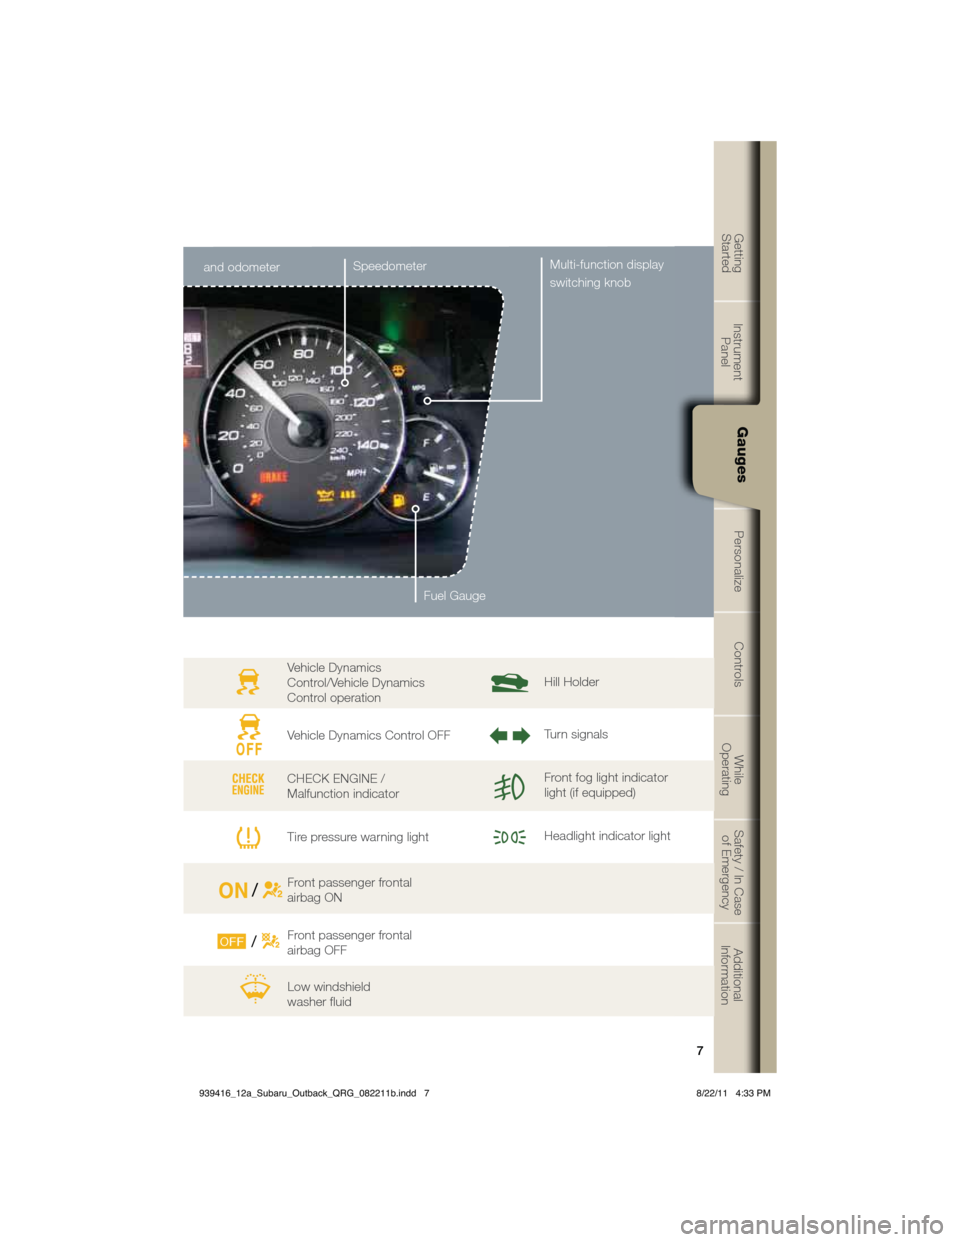 SUBARU OUTBACK 2012 5.G Quick Reference Guide 7
Getting  
StartedInstrument  
PanelGaugesPersonalize Controls While  
OperatingSafety / In Case 
of EmergencyAdditional 
Information
7
GetGt
tintig
Starte
d
InsItrument 
Panel
Gau
ges
PerP
son
alili